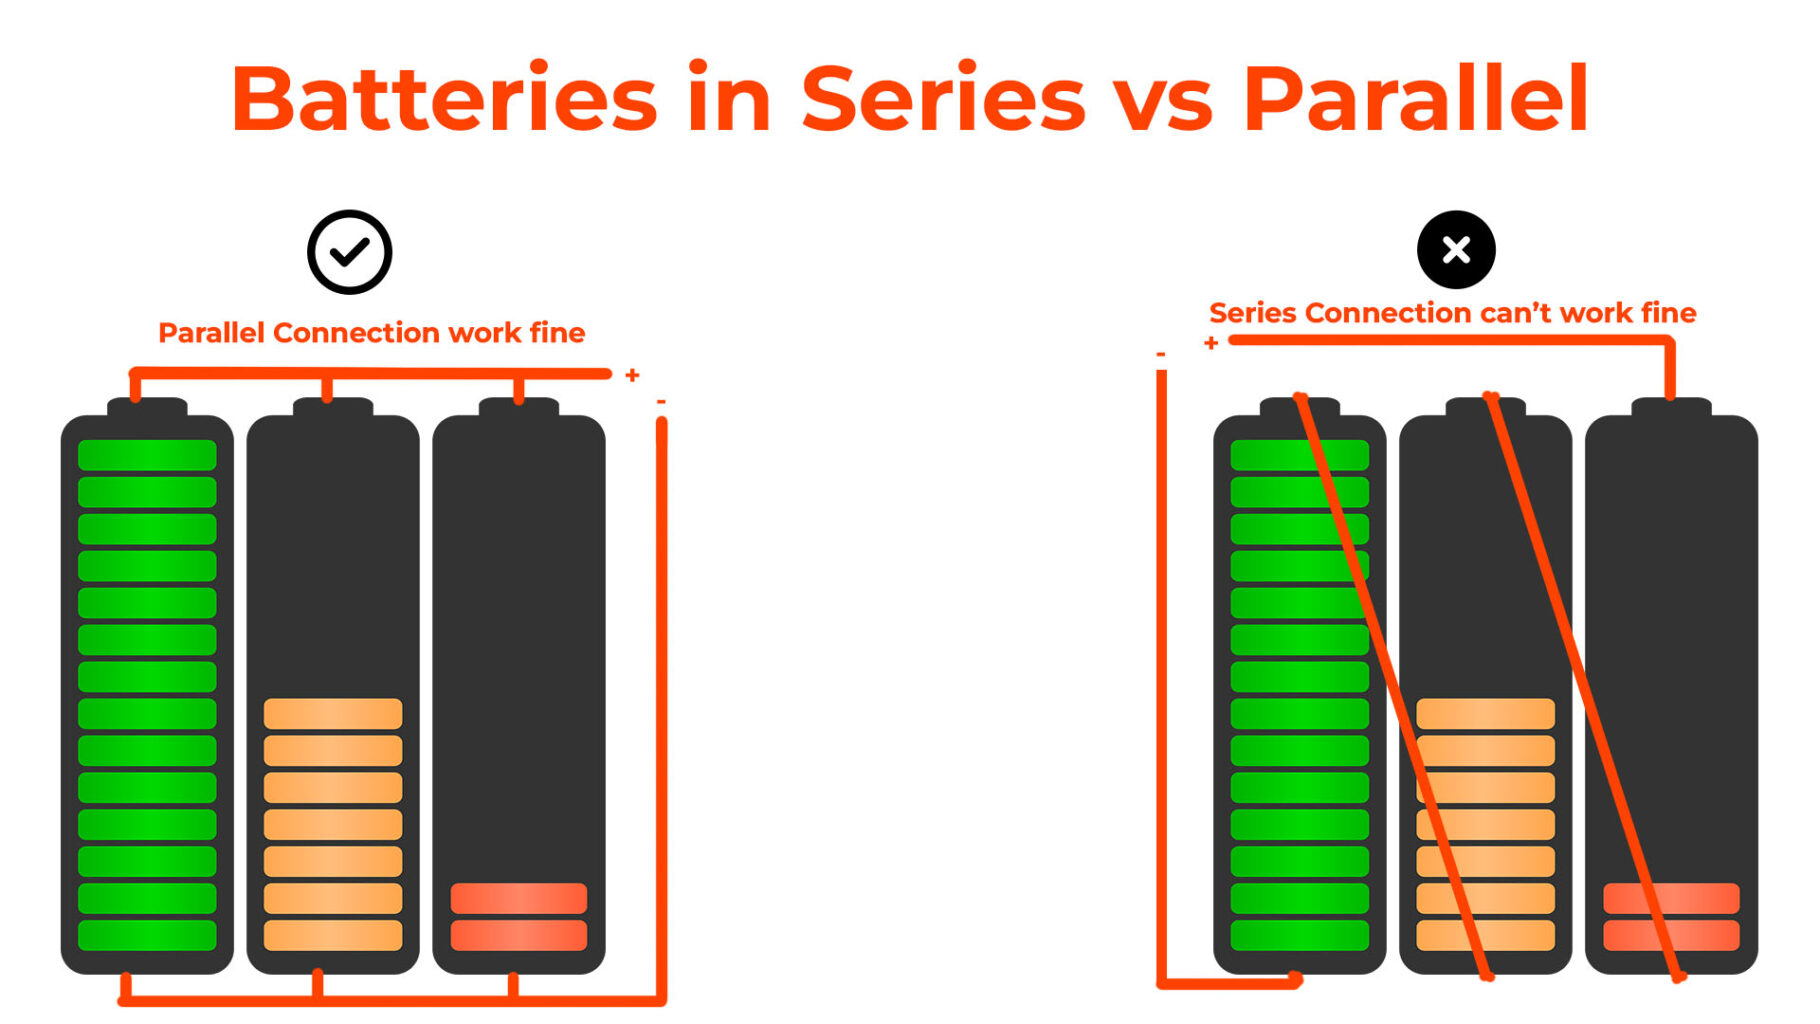 Batteries in Series vs Parallel which one is better